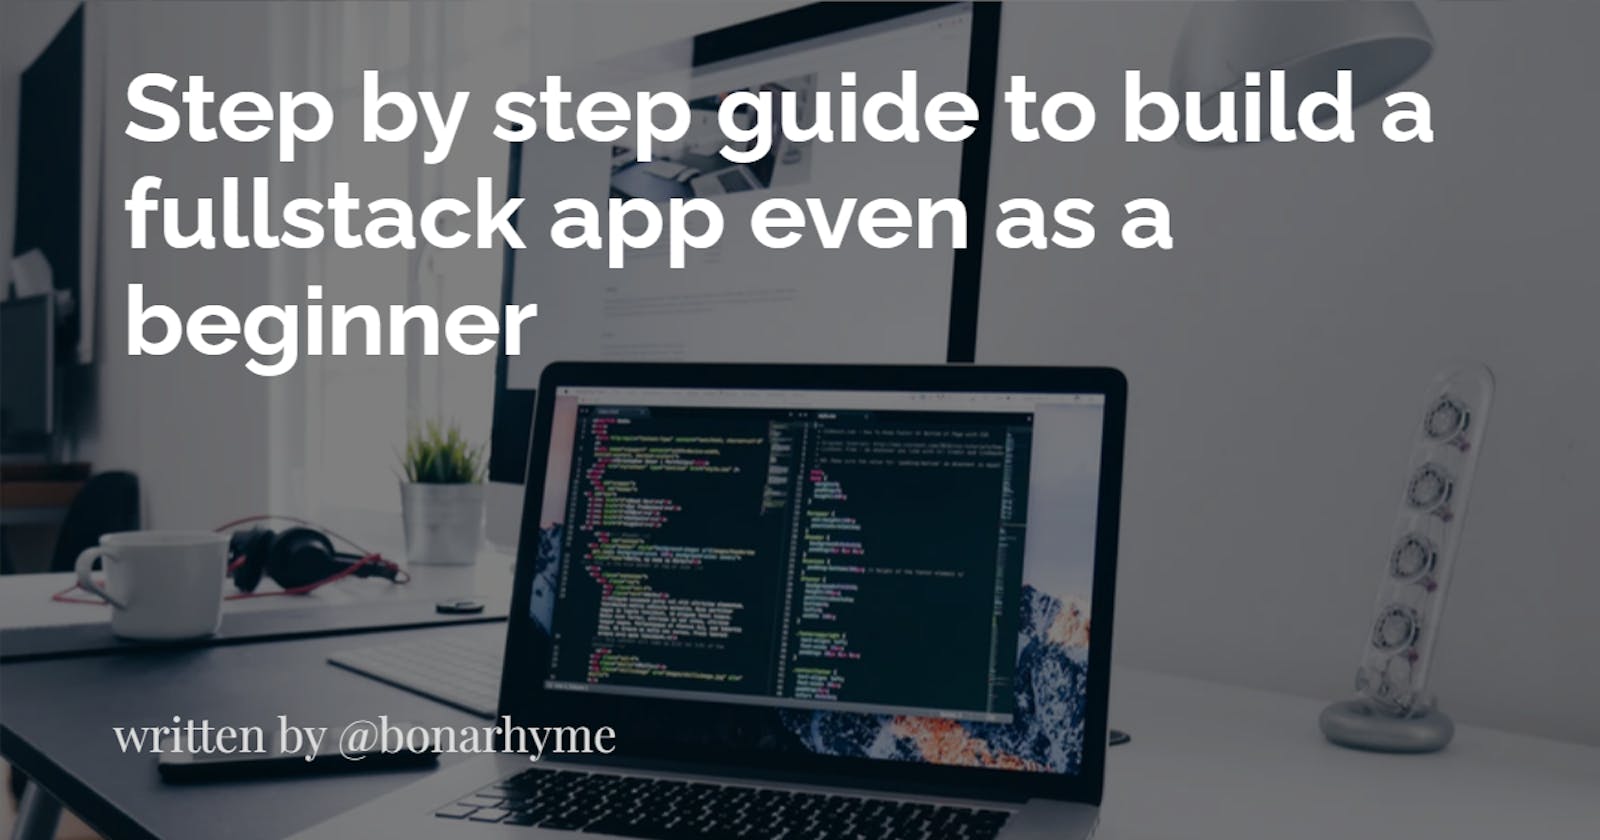 Step by step guide to build a full stack app even as a beginner